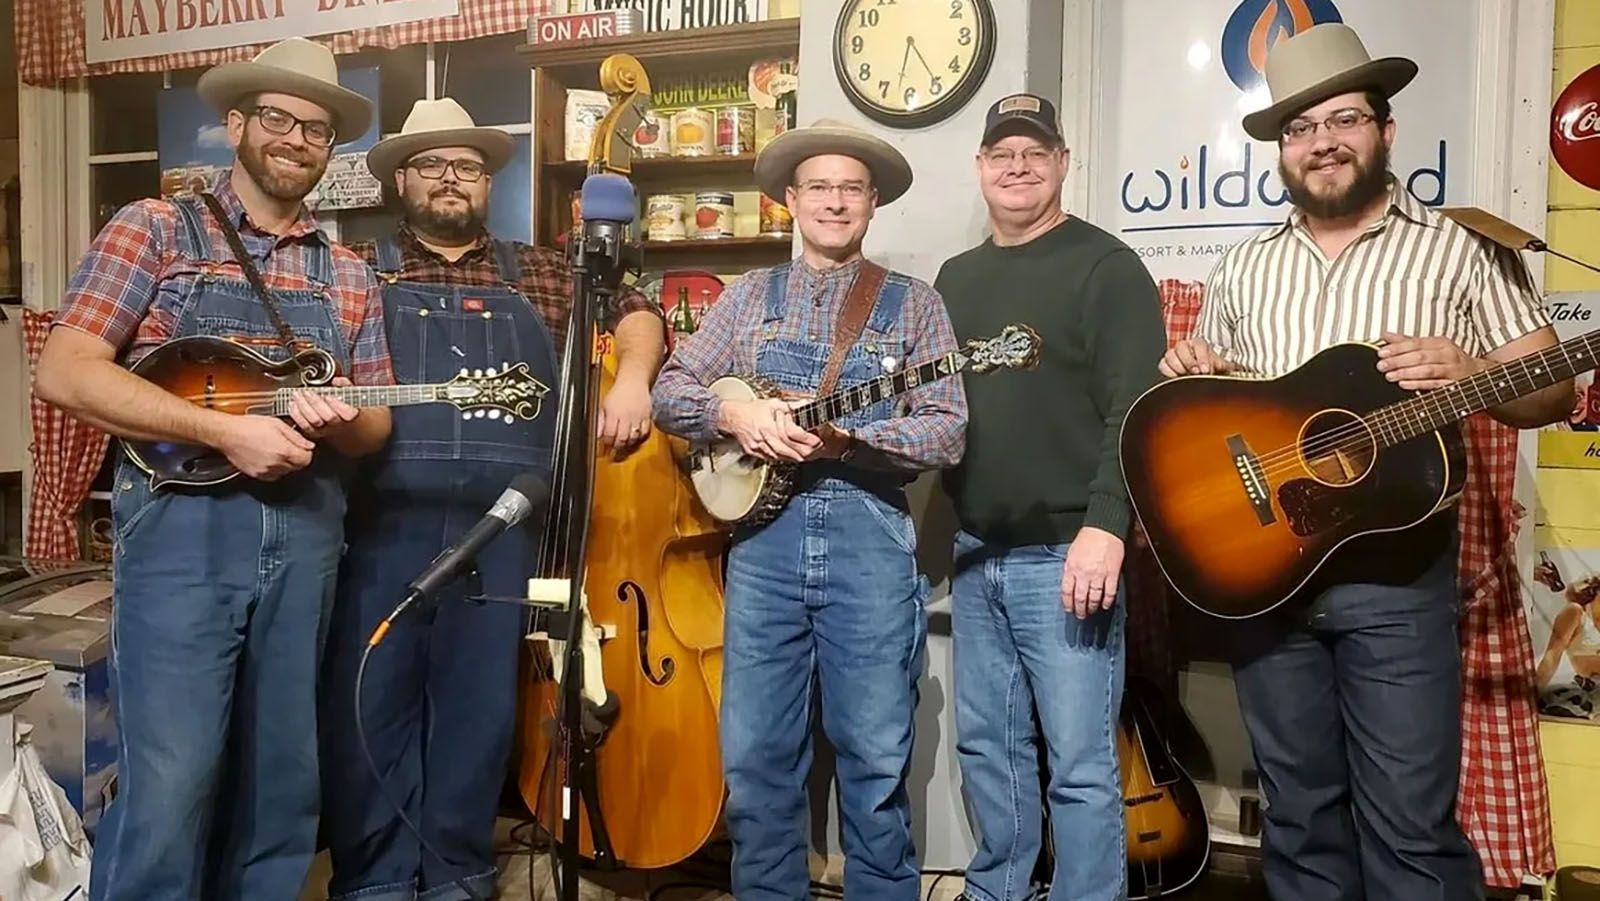 Phillip Steinmetz & His Sunny Tennesseans will be among the many acts taking part in the Northern Indiana Bluegrass Association’s annual Tri-State Bluegrass Music Festival over Labor Day Weekend at Noble County Fairgrounds in Kendallville.